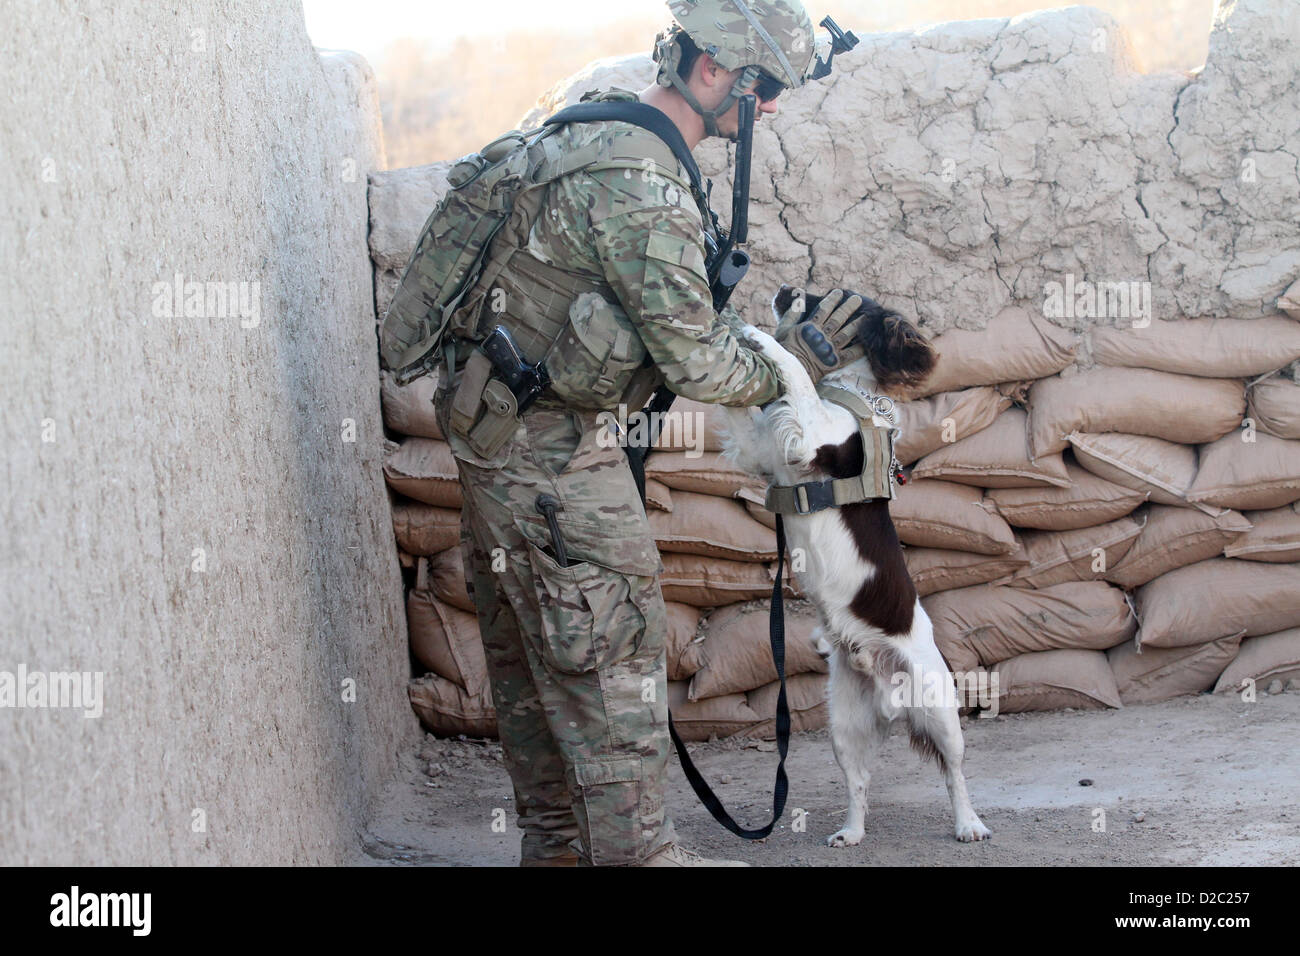 A US army soldiers plays with Bandit, a military working dog during a security operation January 19, 2-13 in Farah province, Afghanistan. Stock Photo